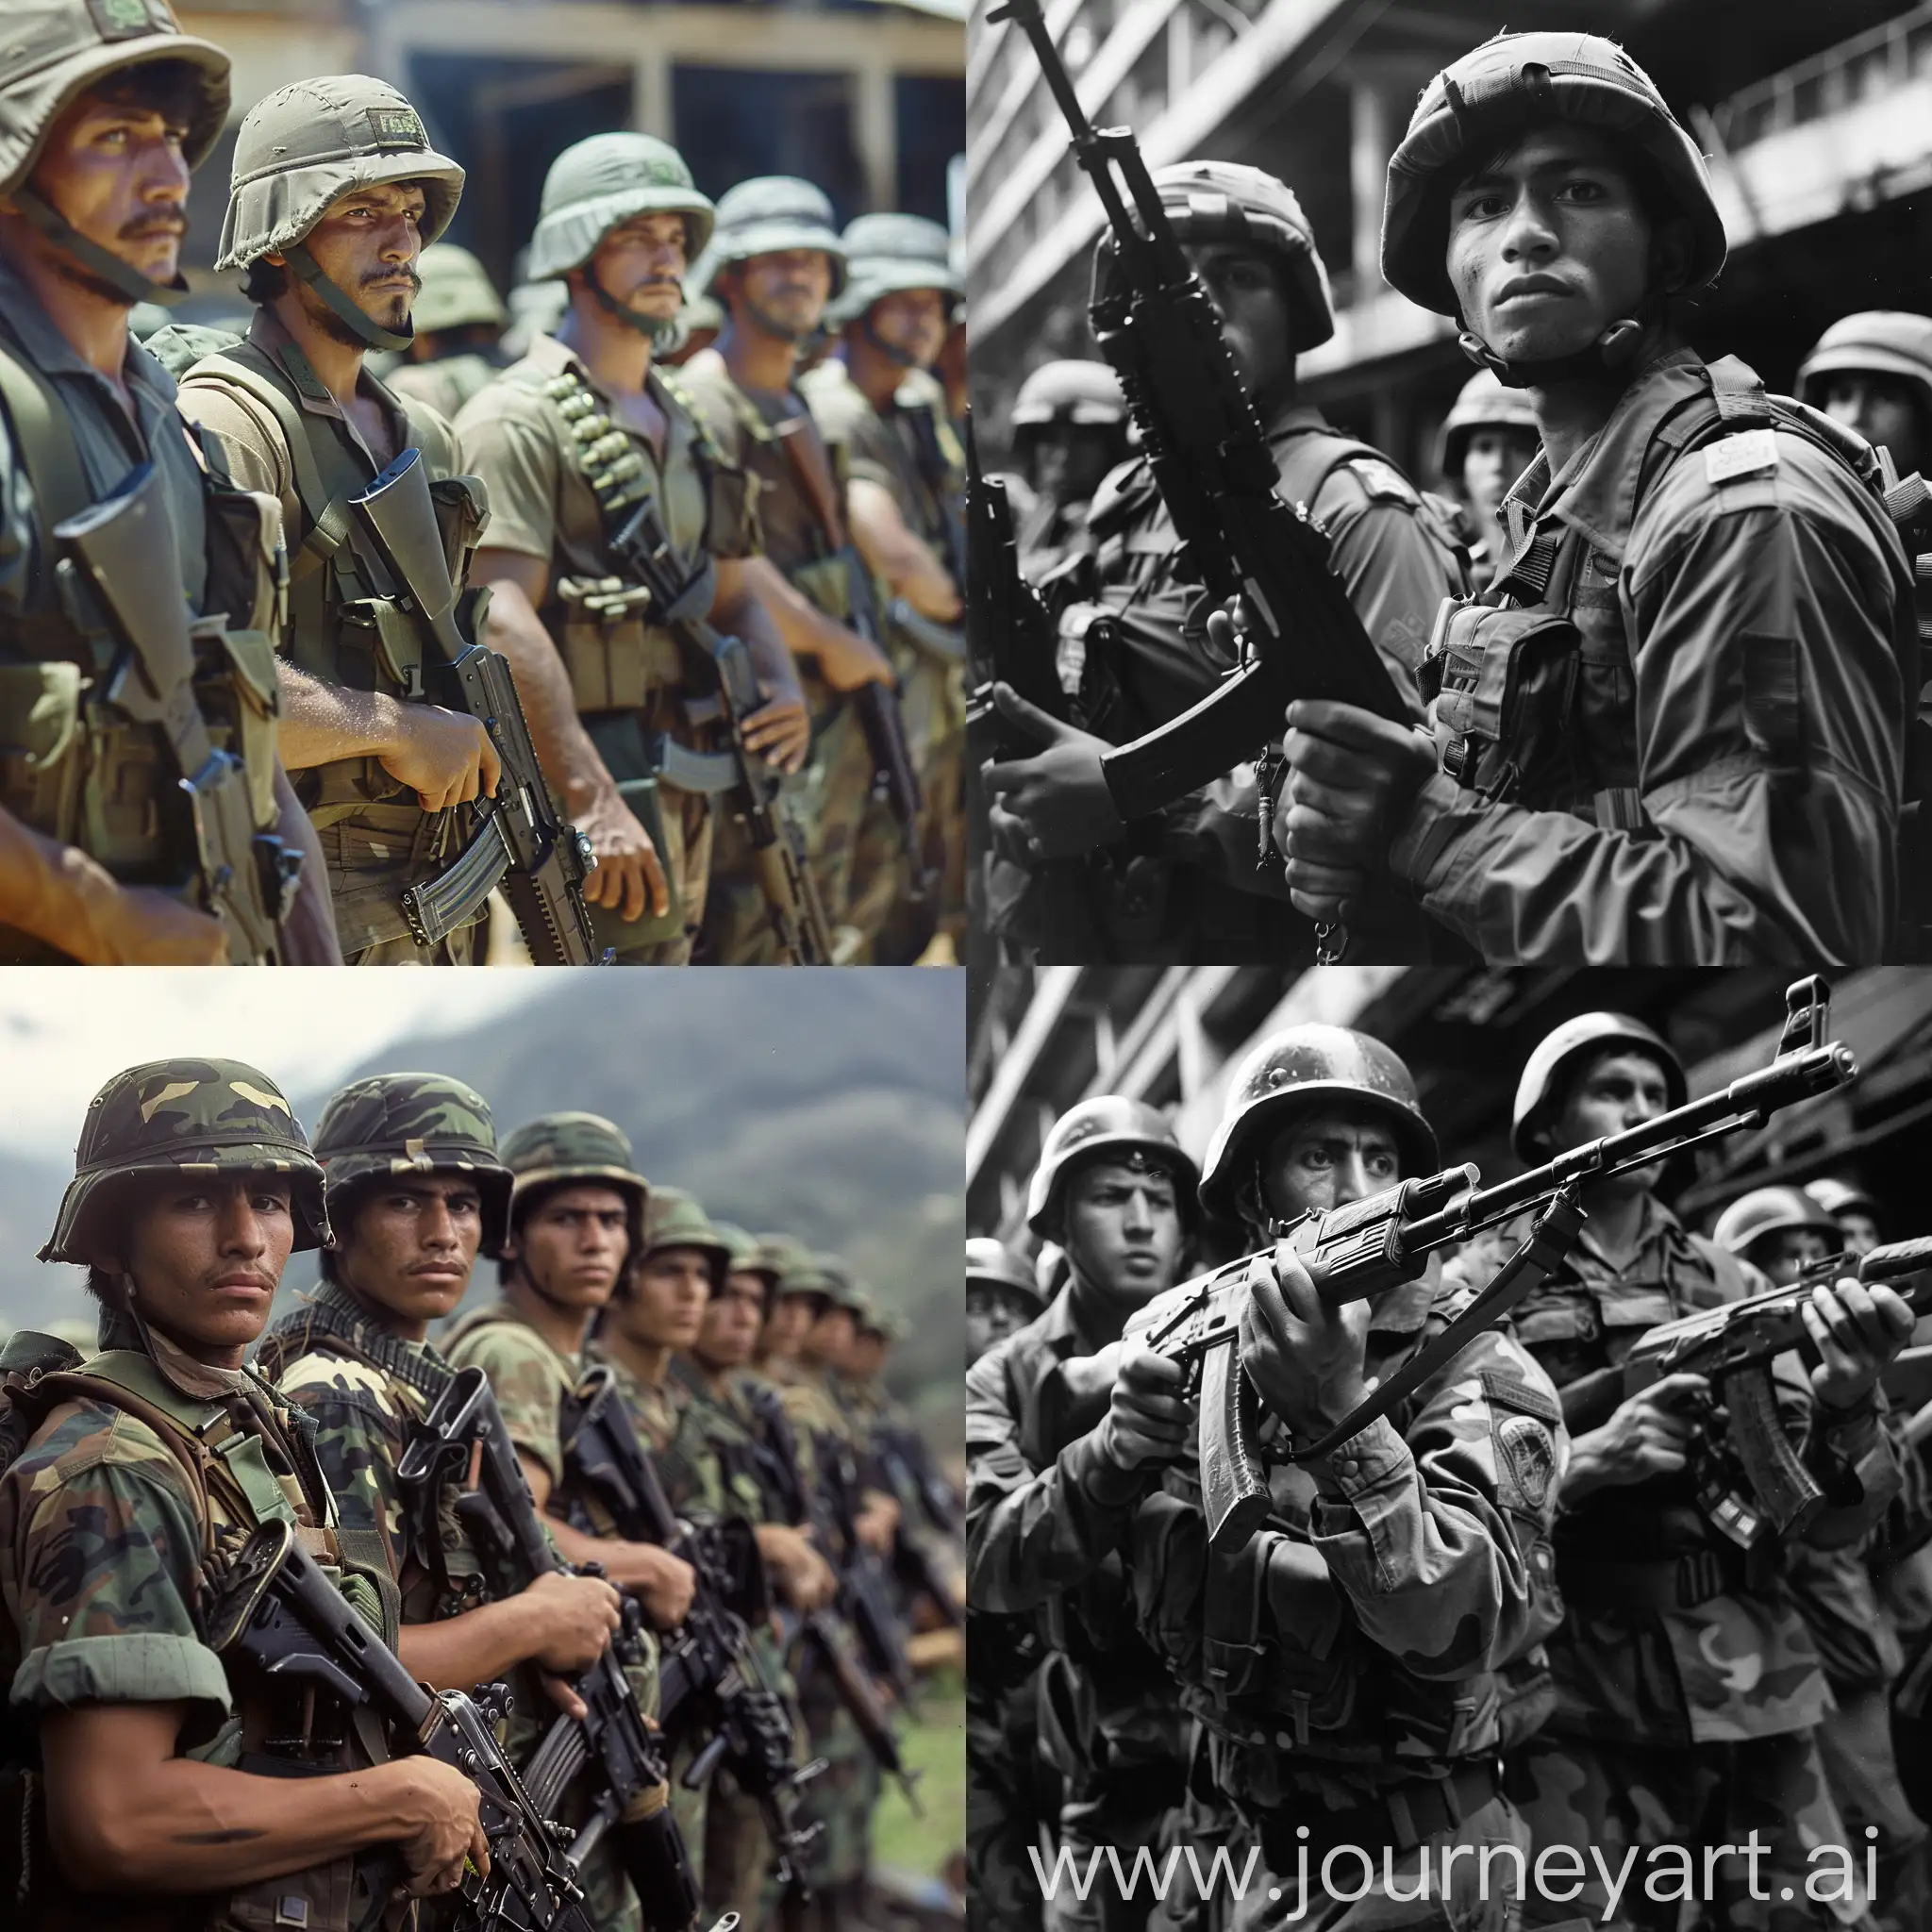 Soldiers of the South American Private Military Company, fully armed with automatic rifles in their hands, in 1986.